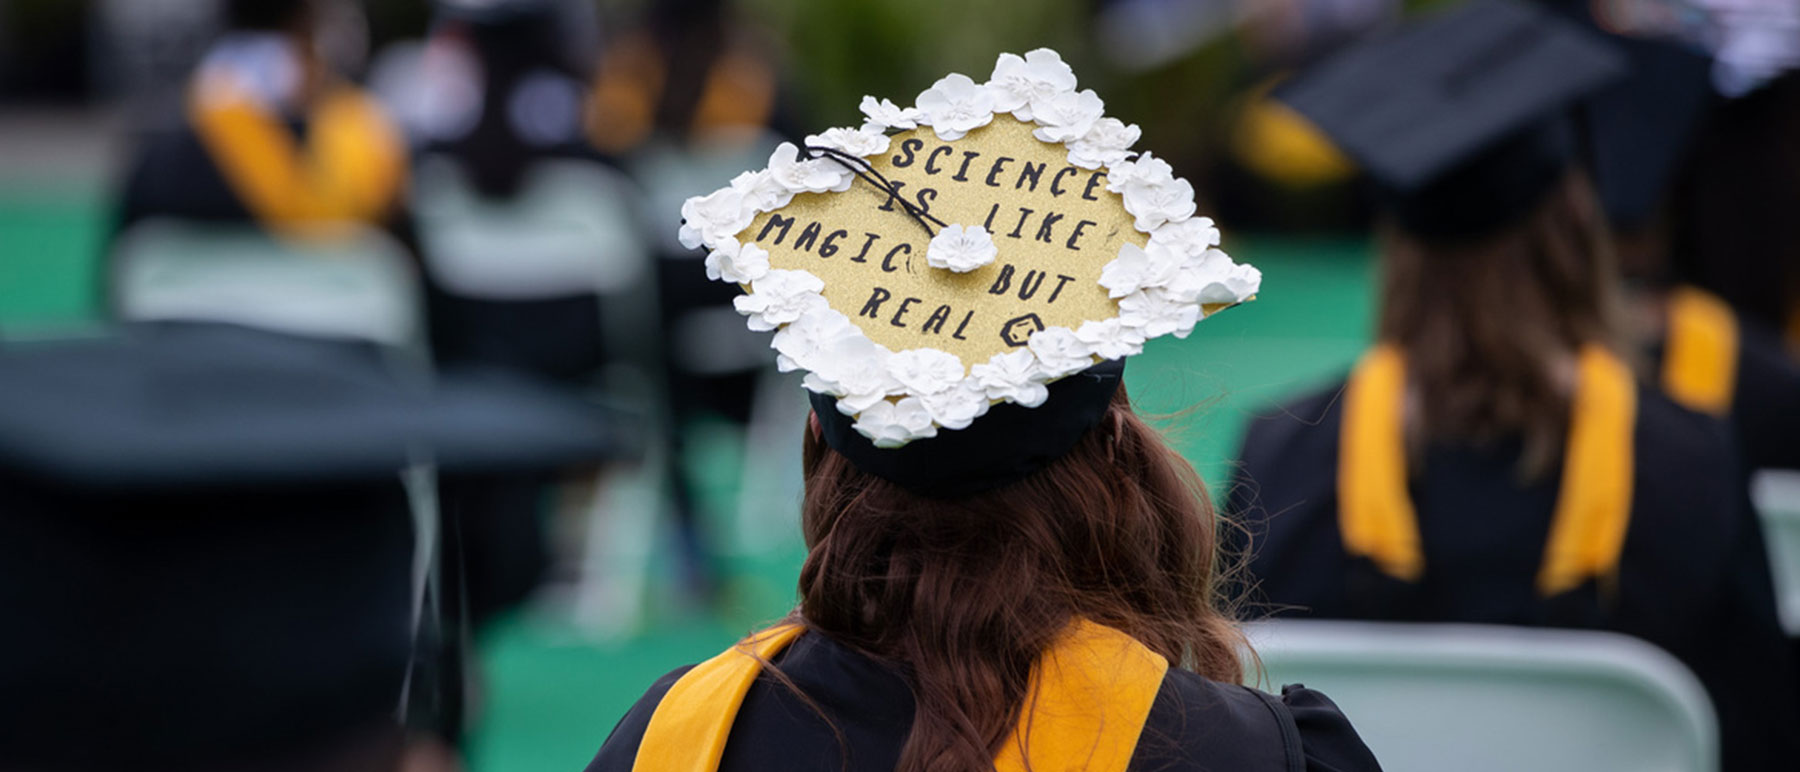 a v. c. u. student at a commencement ceremony wearing a graduation cap that reads 